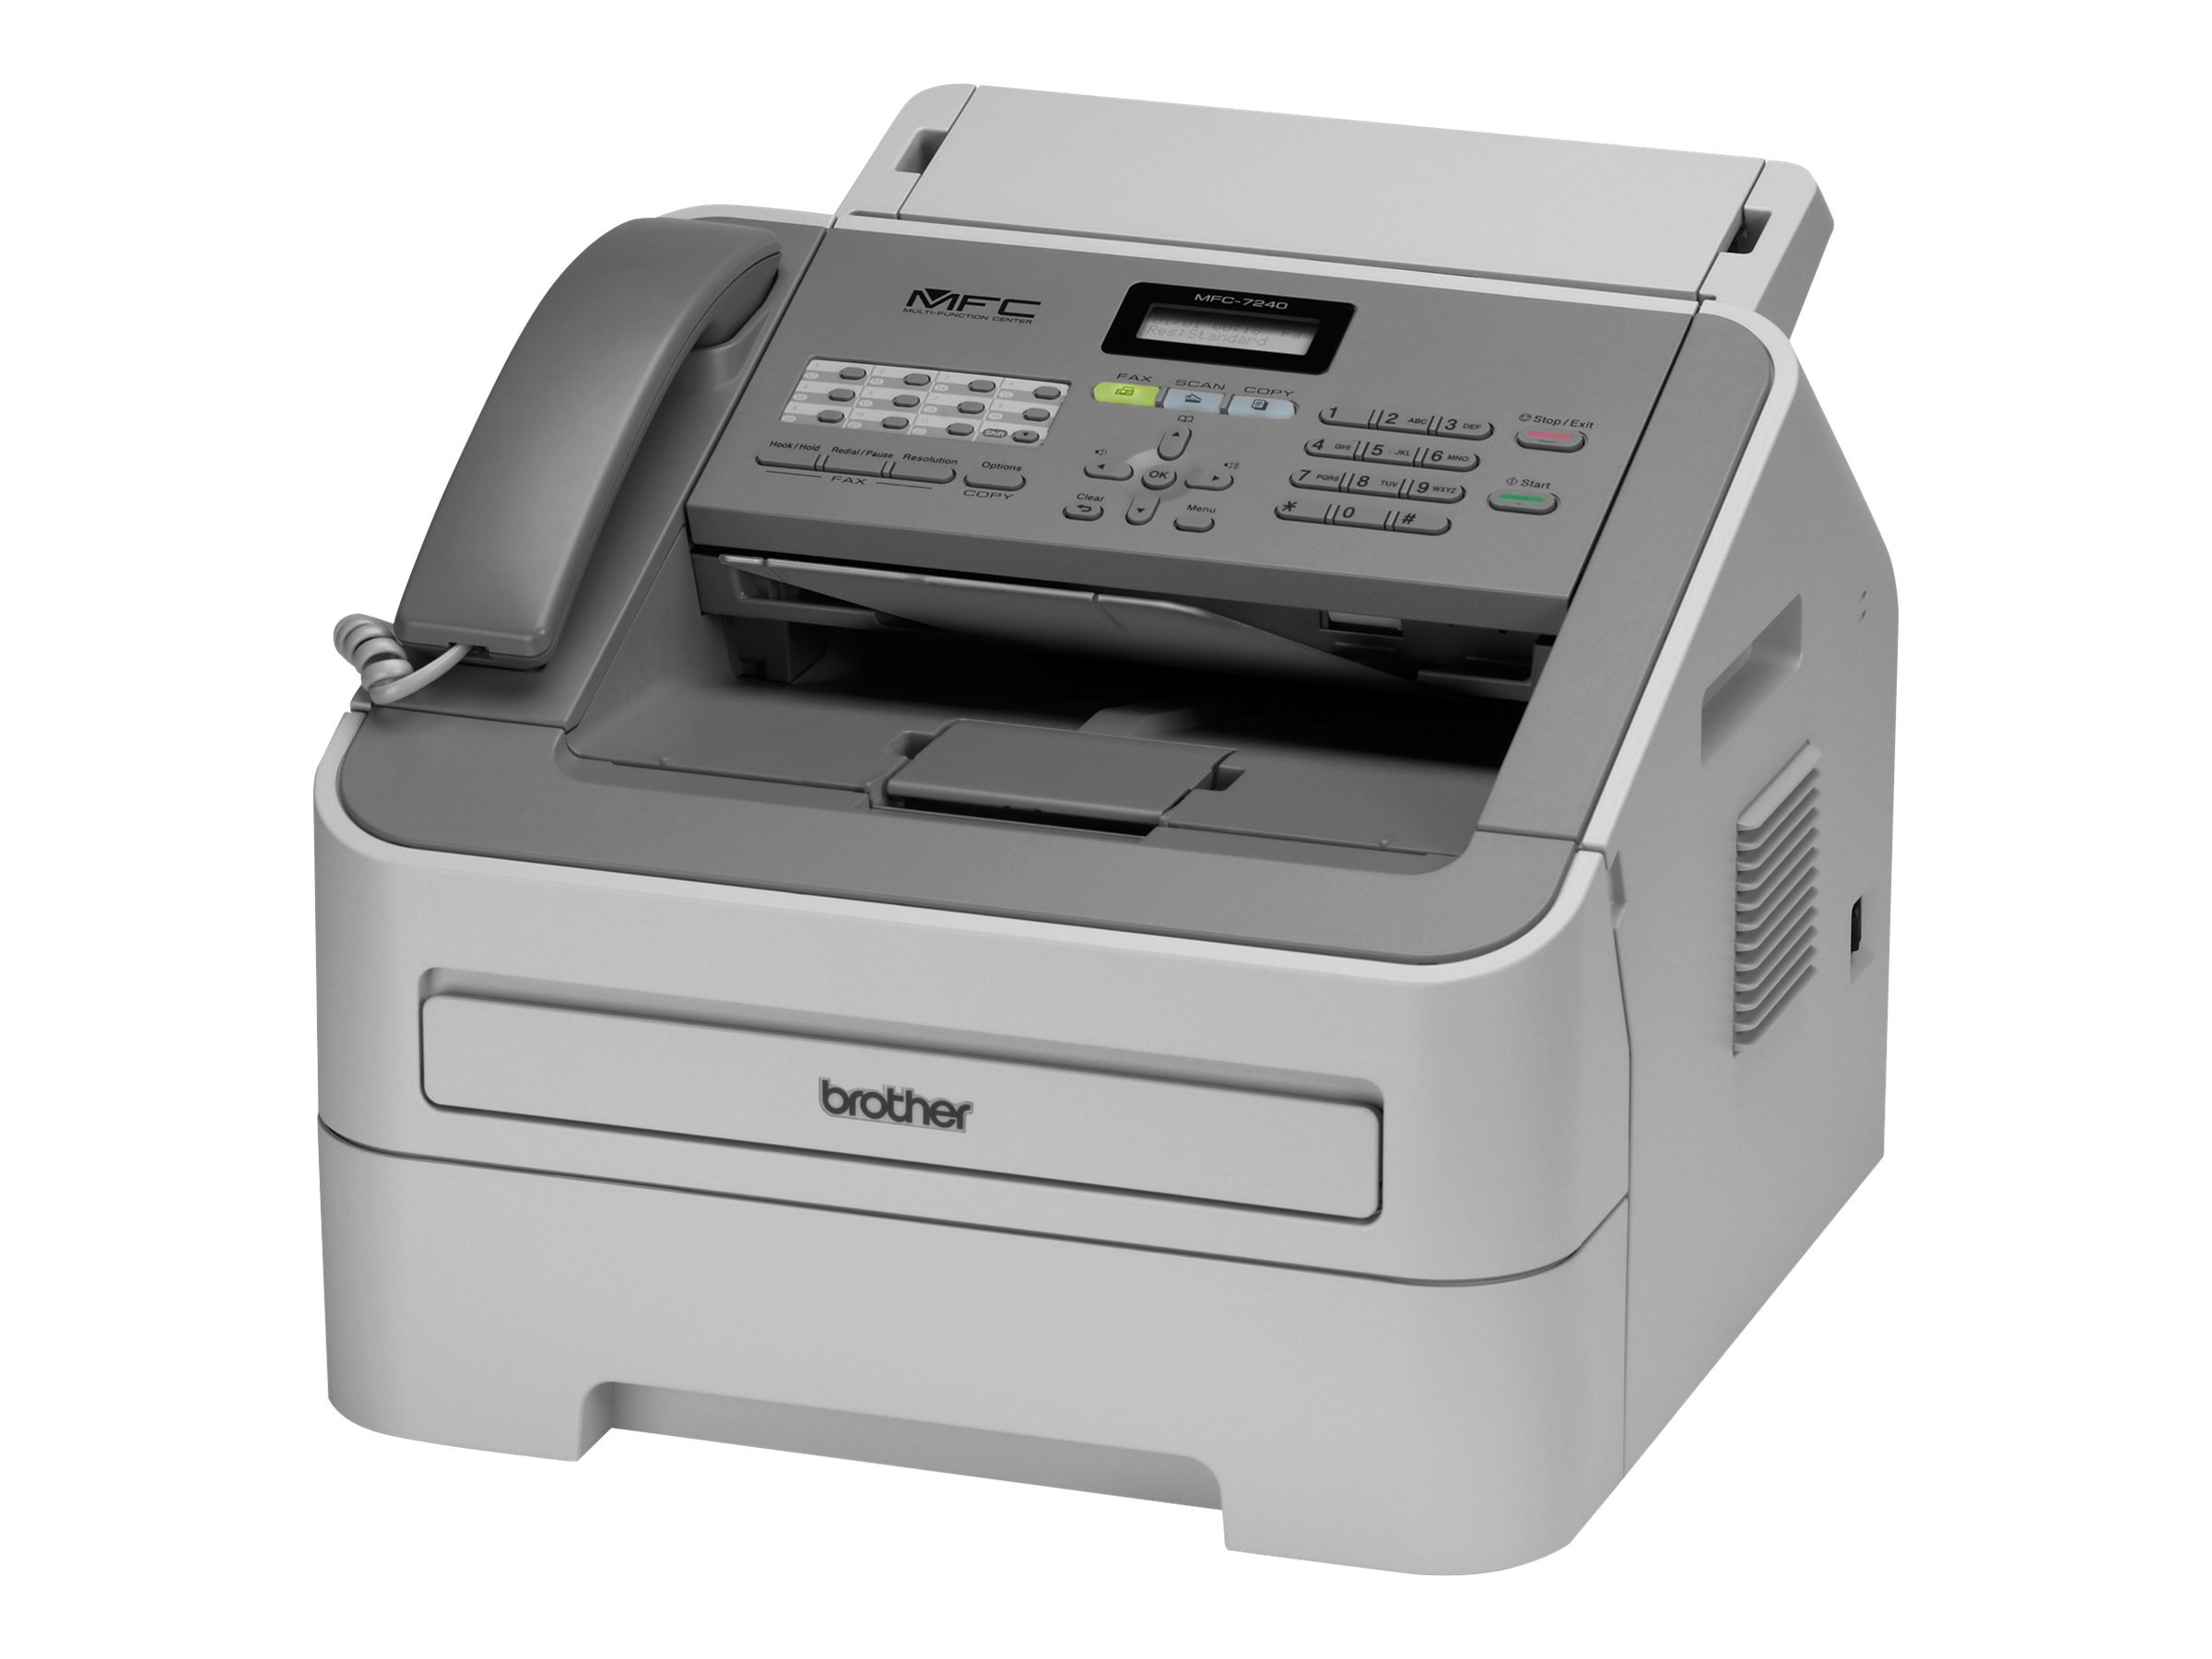 Brother MFC-7240 - Multifunction printer